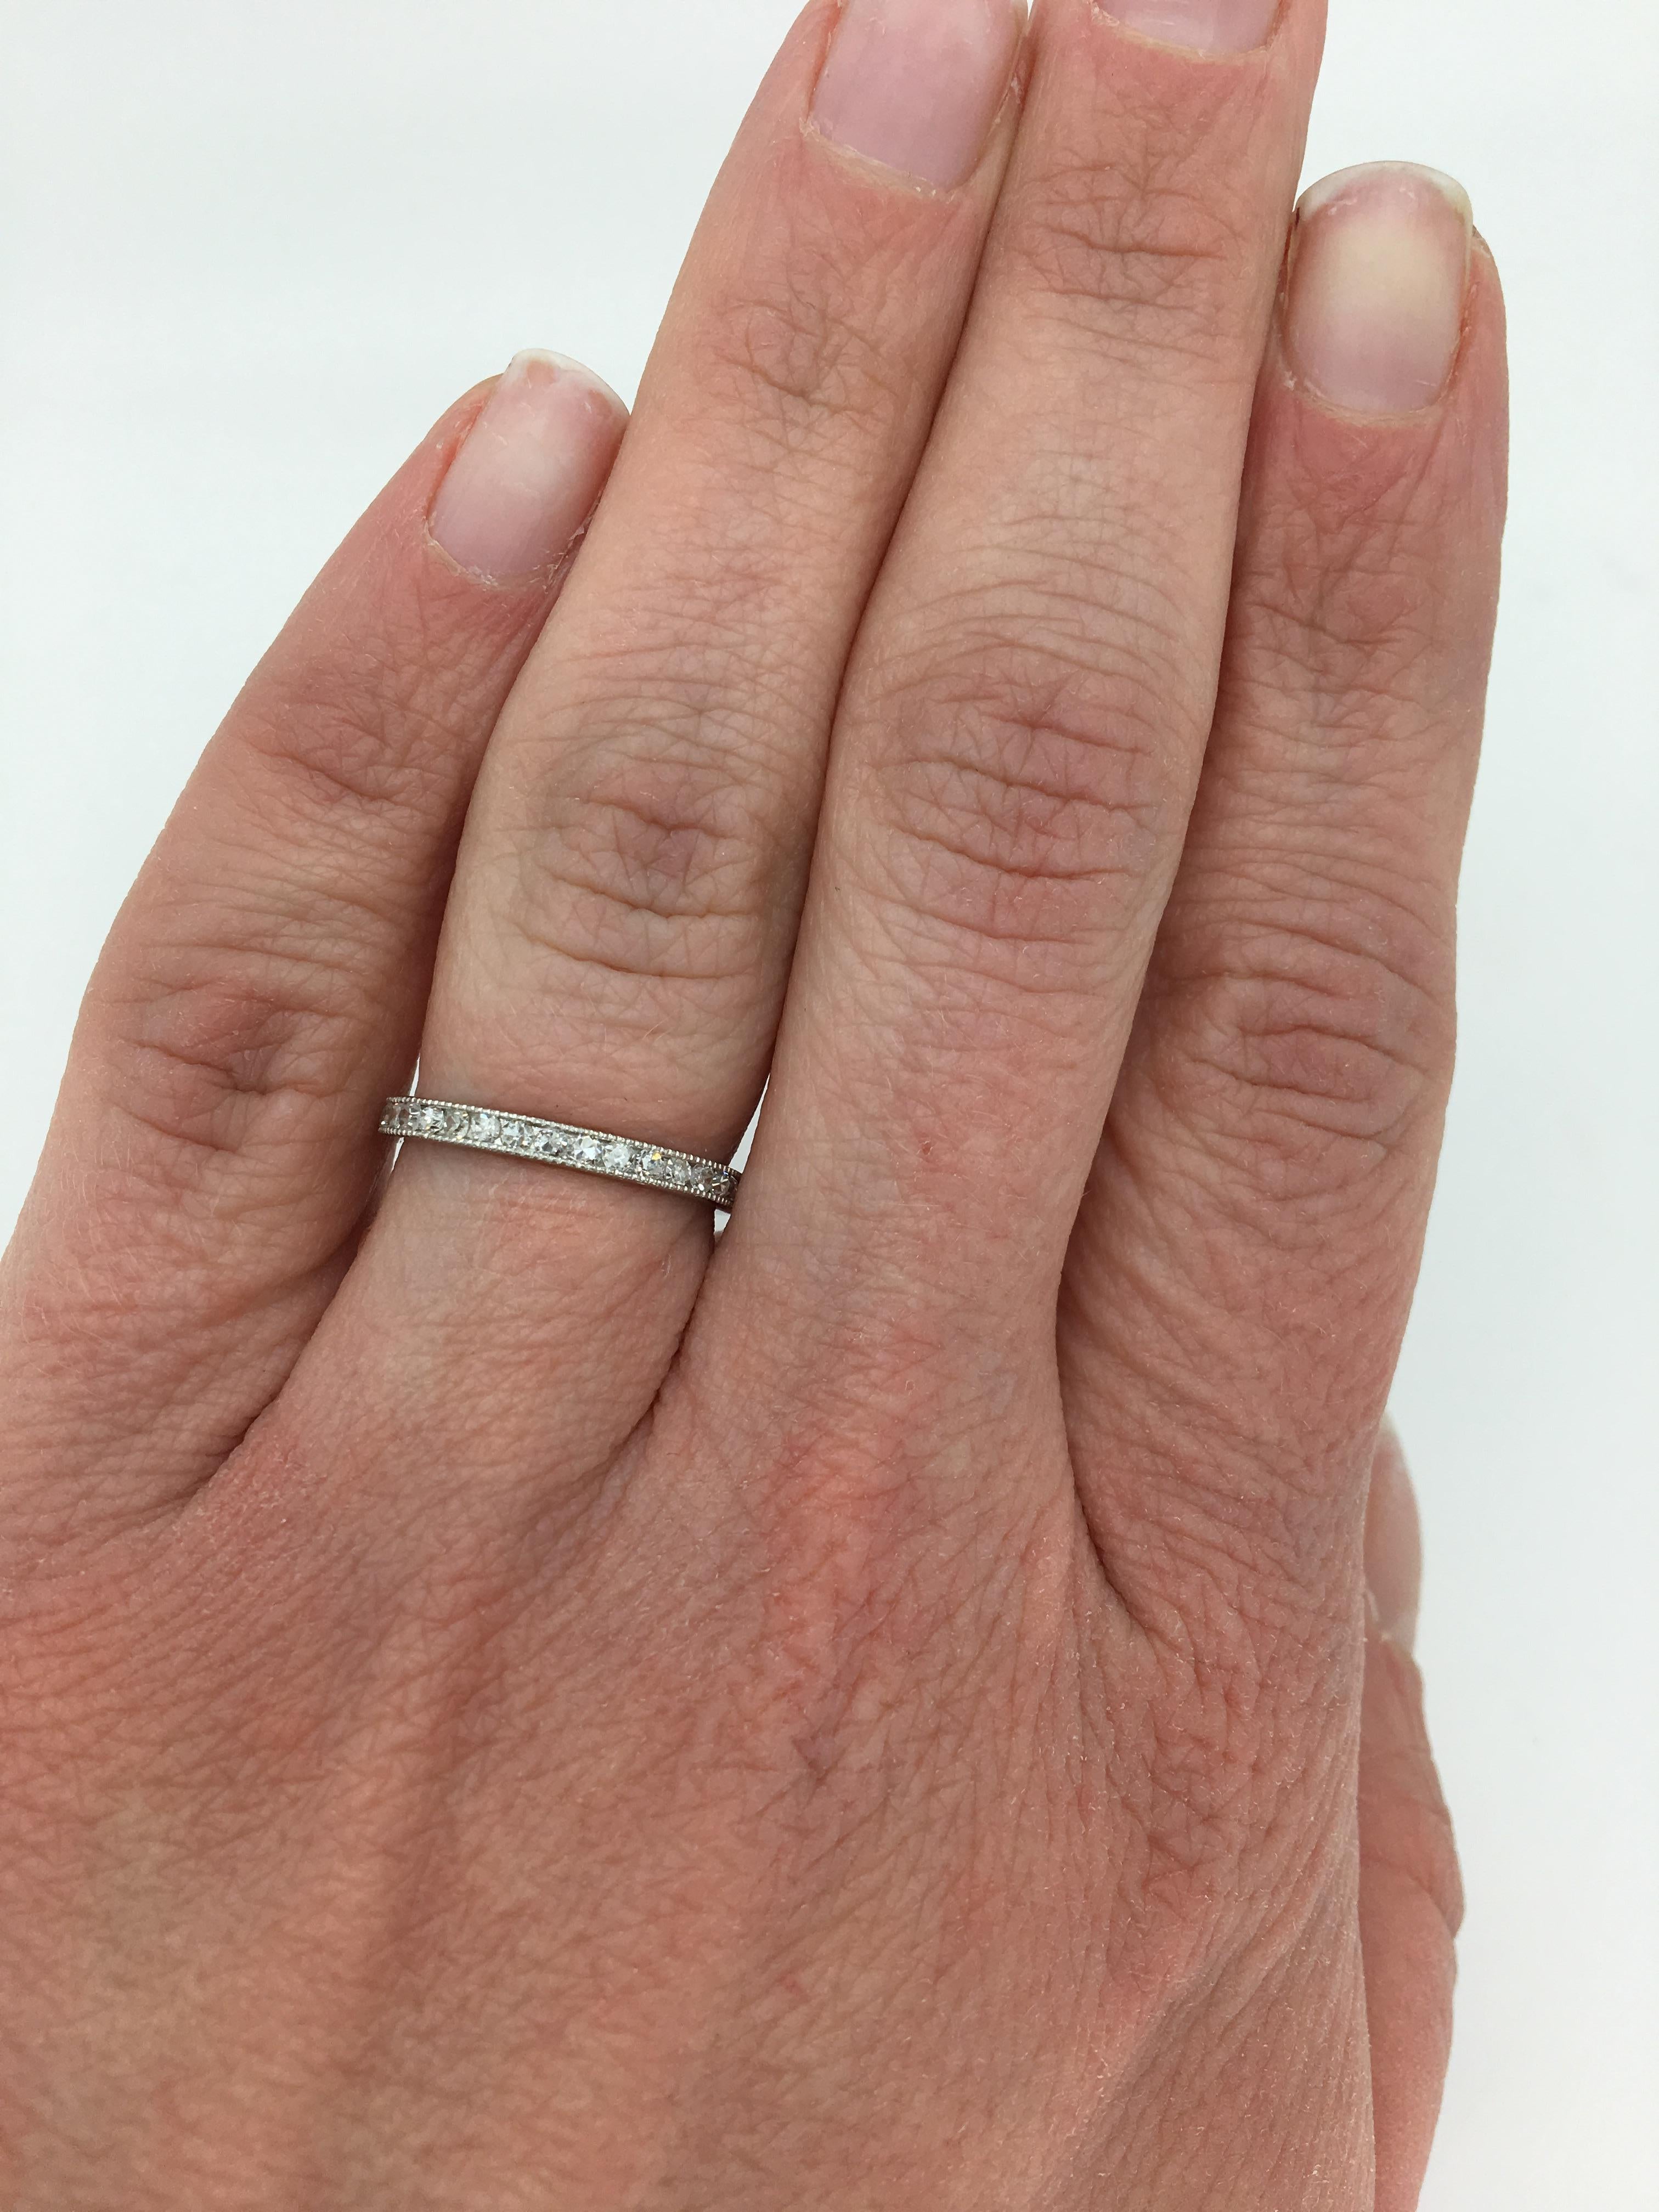 Platinum diamond eternity band with mil-grain detail.

Gemstone: Diamond
Diamond Carat Weight: Approximately .70ctw
Diamond Cut: Single Cut
Color: Average G-H
Clarity: Average SI-I
Metal: Platinum
Marked/Tested: Tested Platinum
Weight: 1.5